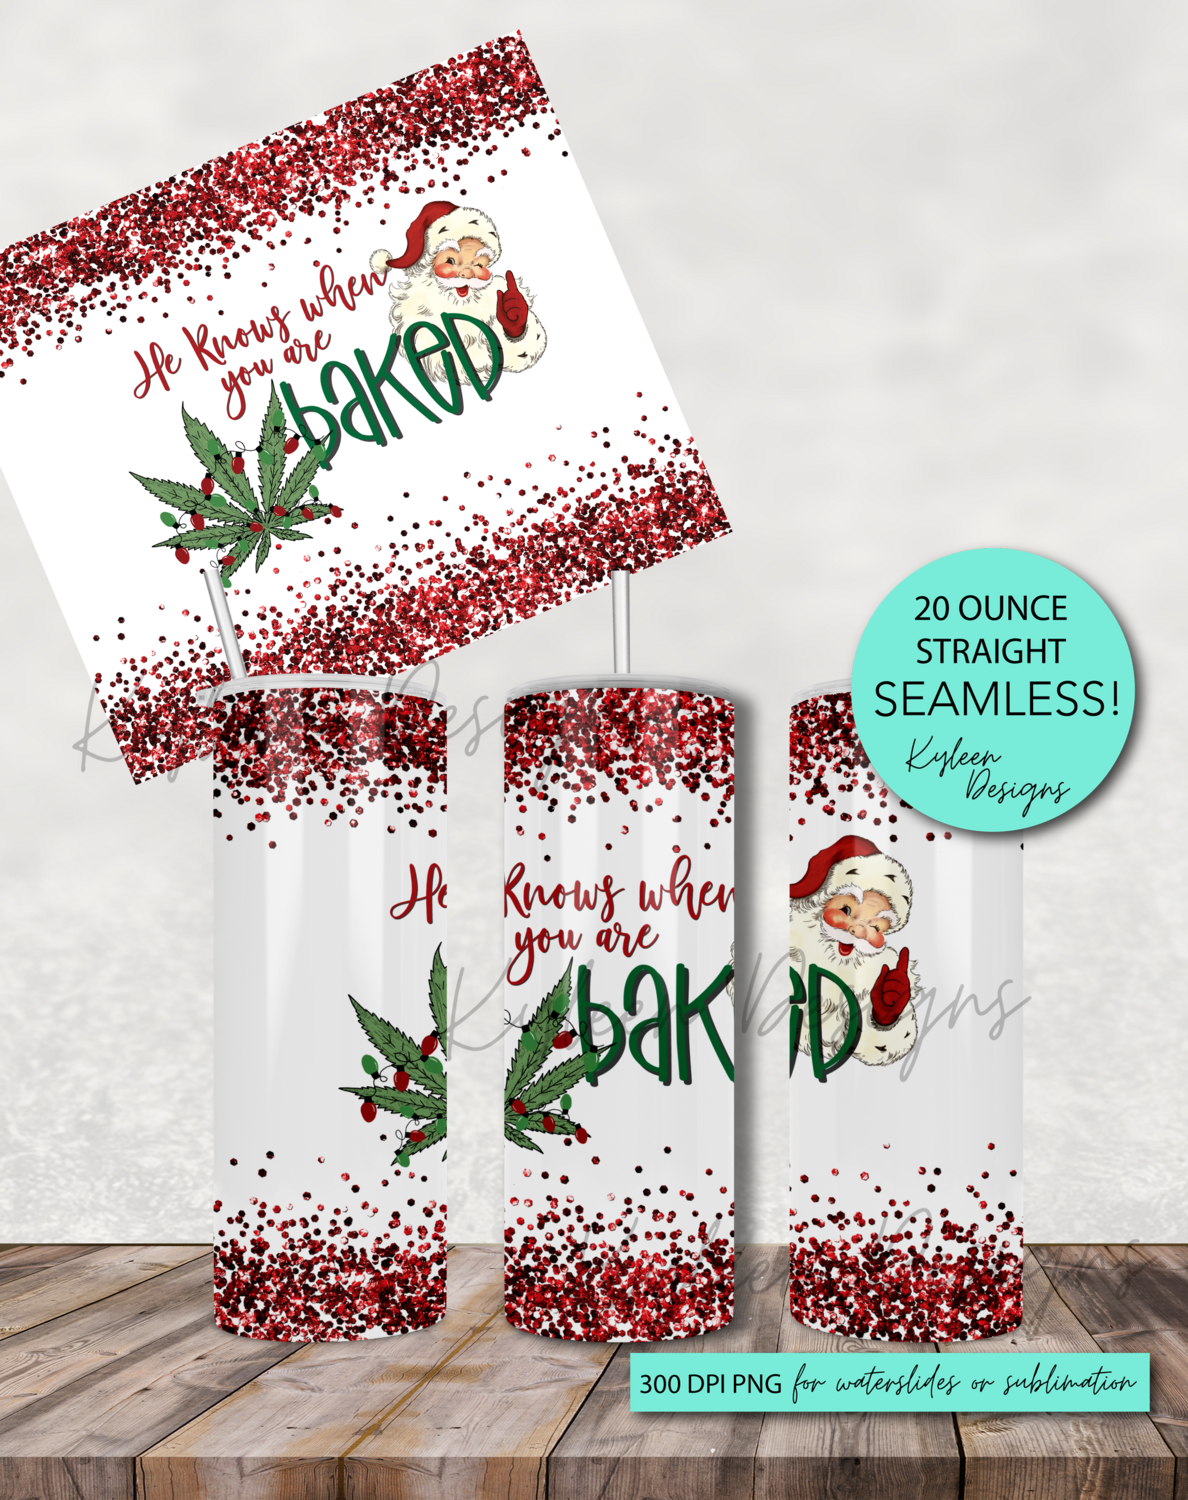 20 ounce Seamless He knows when you are baked wrap for sublimation, waterslide High res PNG digital file